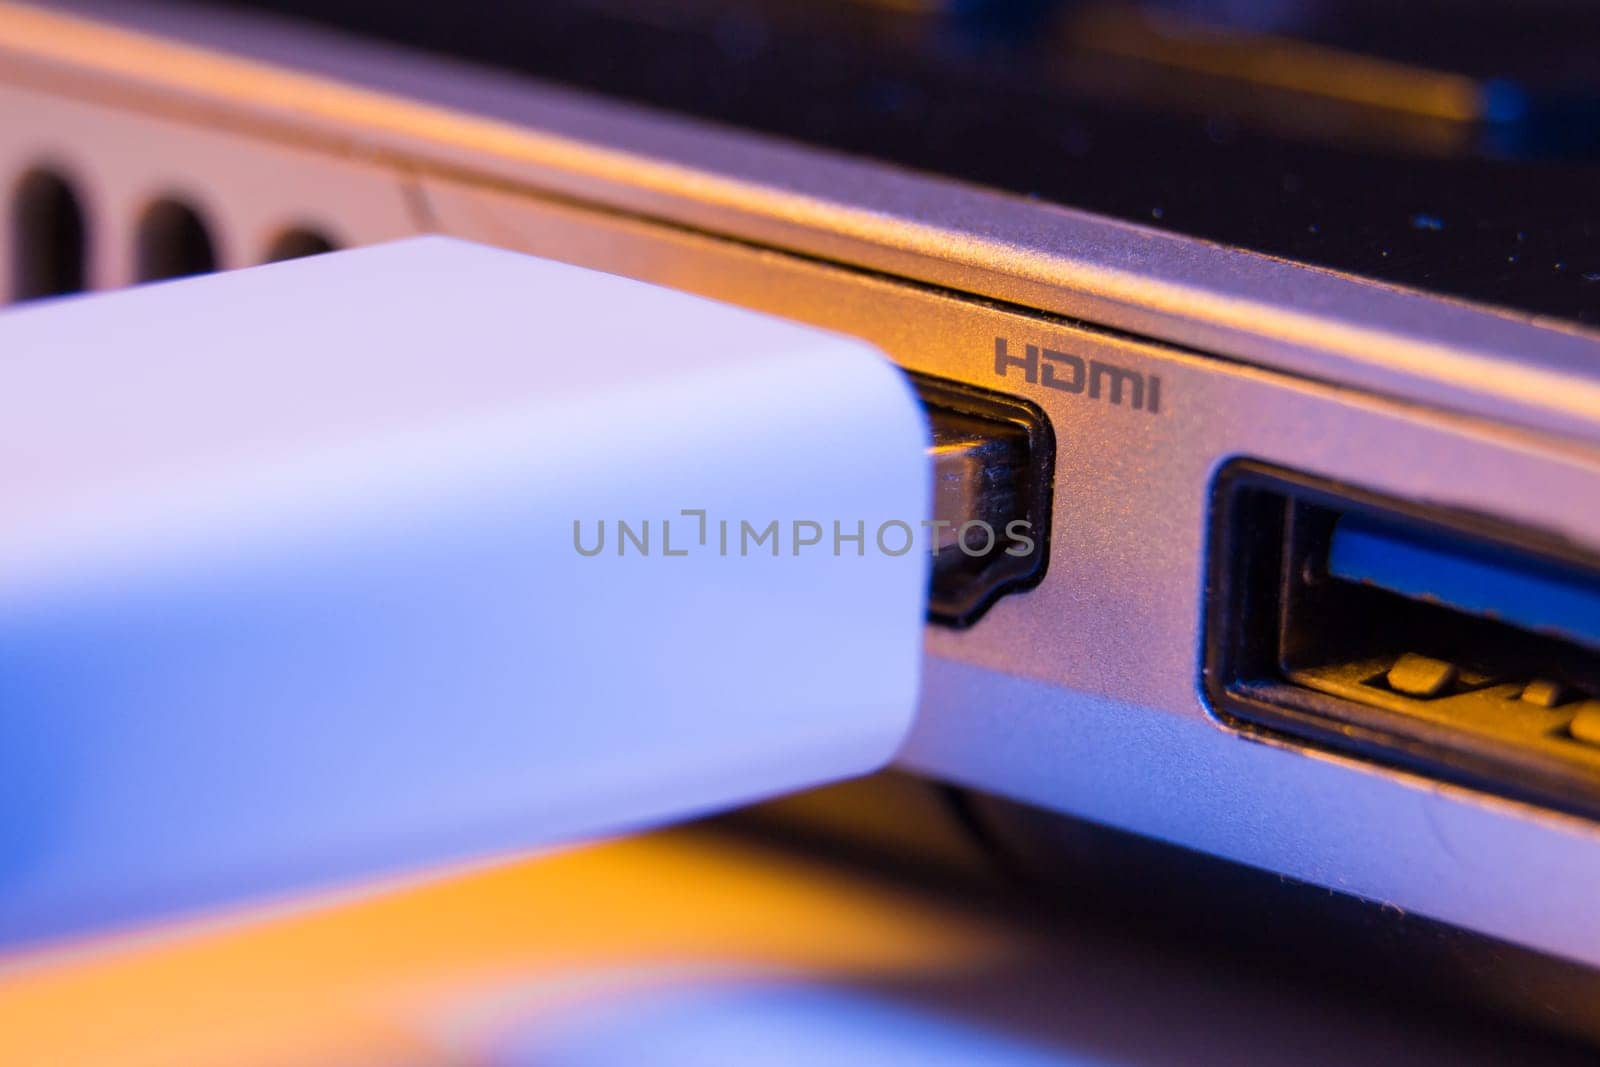 Closeup of HDMI cable plug inserted into port on the side of a laptop by wavemovies